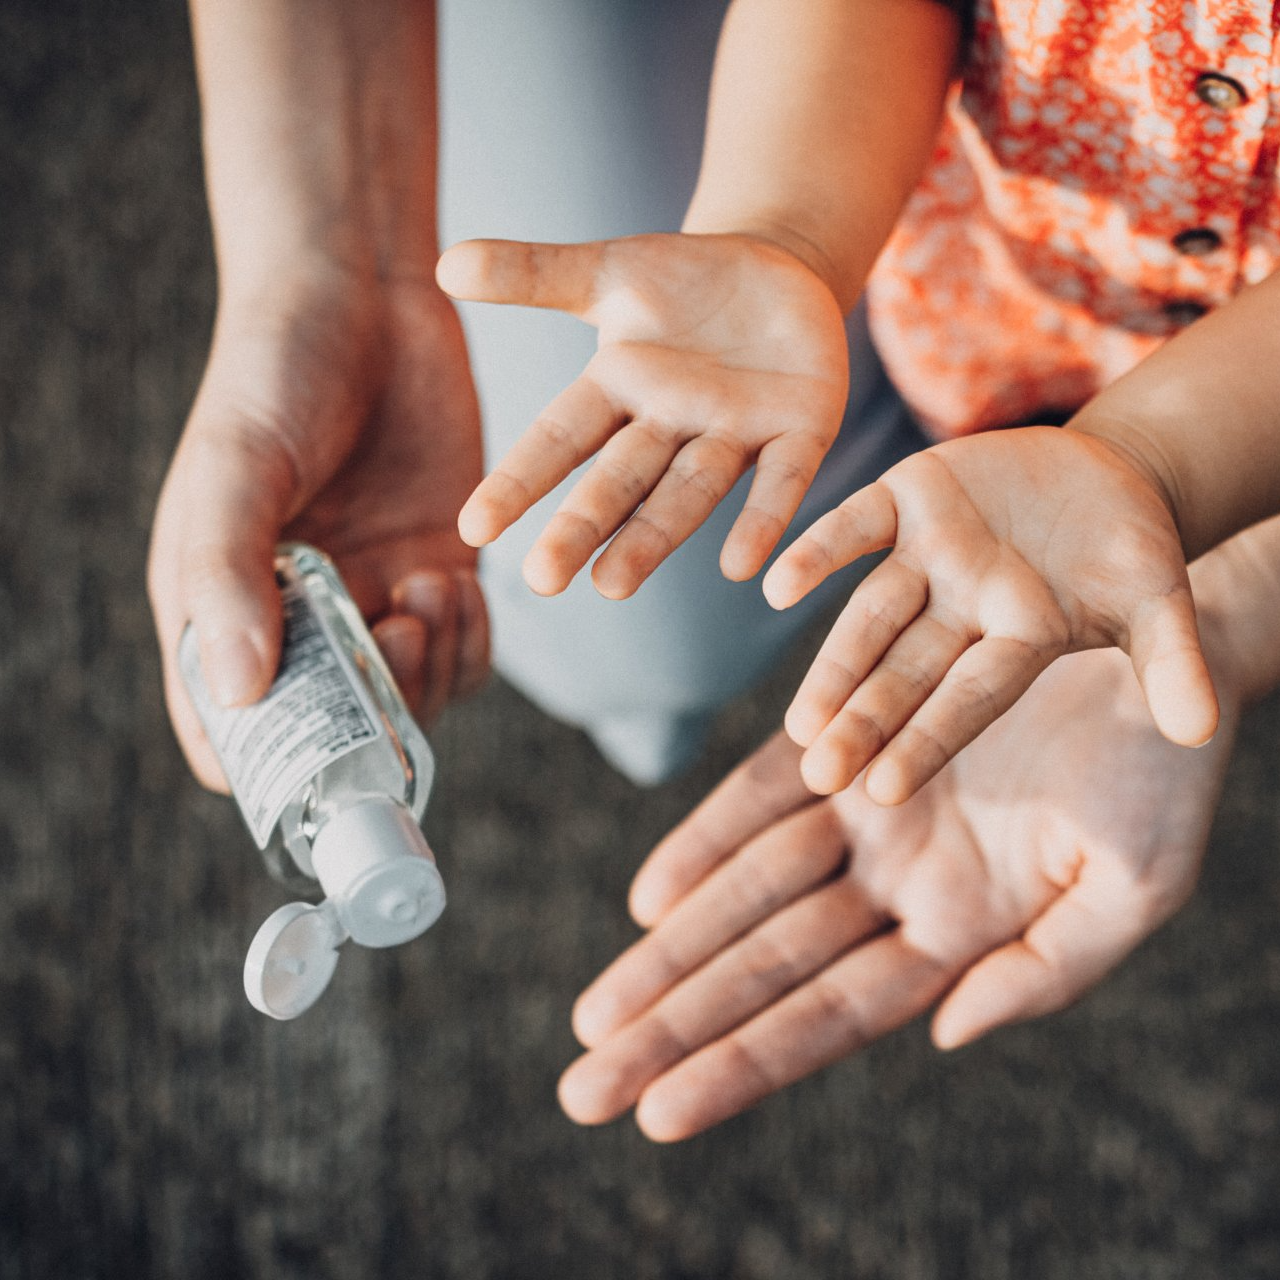 Mother squeezing hand sanitizer onto little daughter's hand outdoors to prevent the spread of viruses